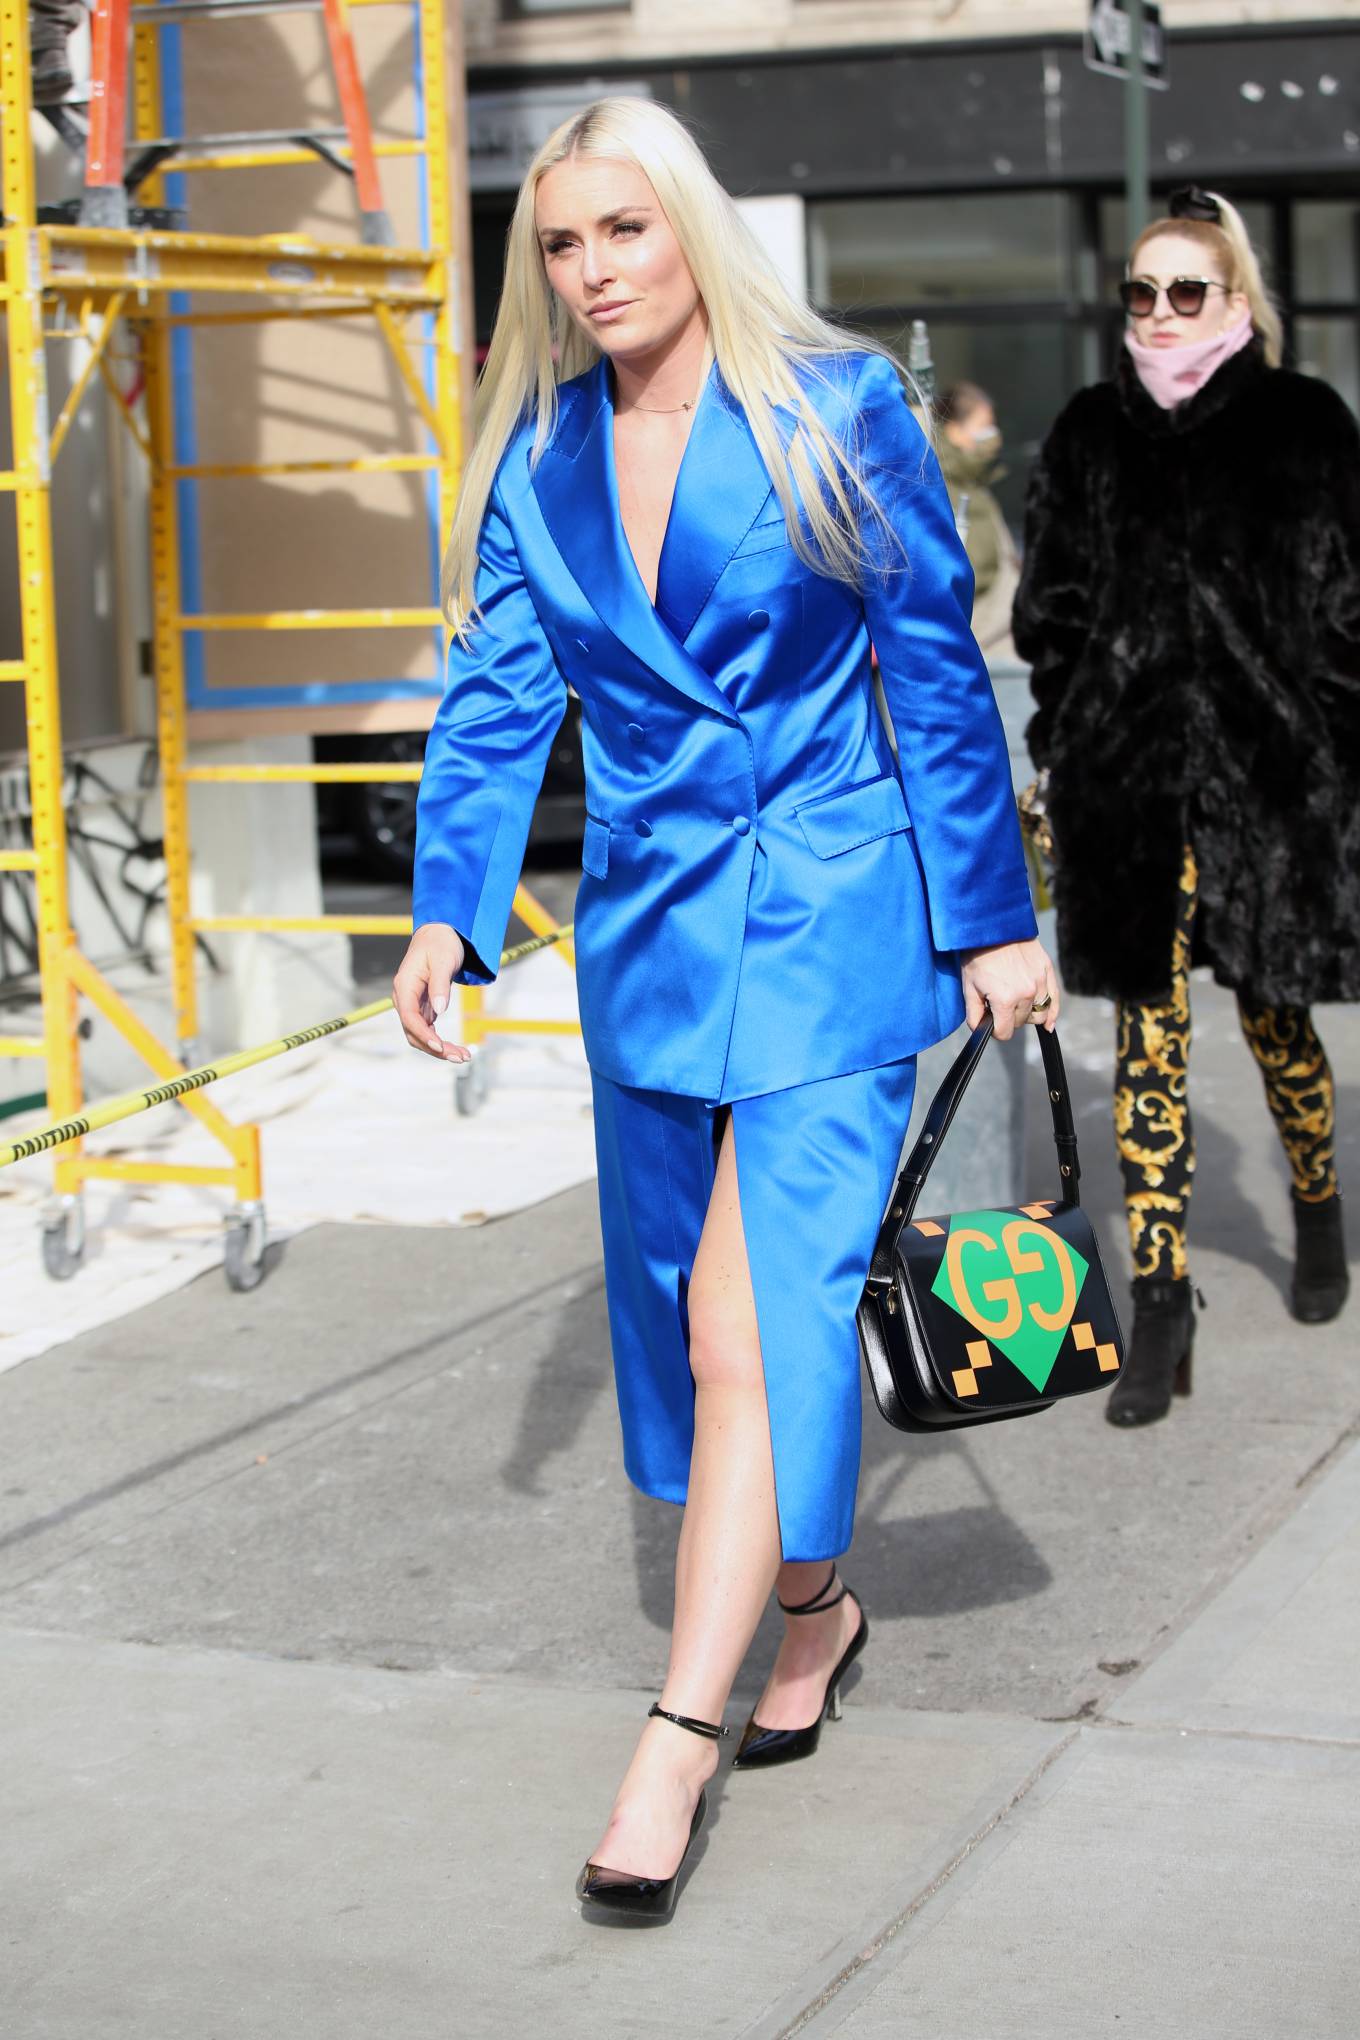 Lindsey Vonn - In a satin blue Gucci outfit promoting her new book 'Rise - My Story' in New York